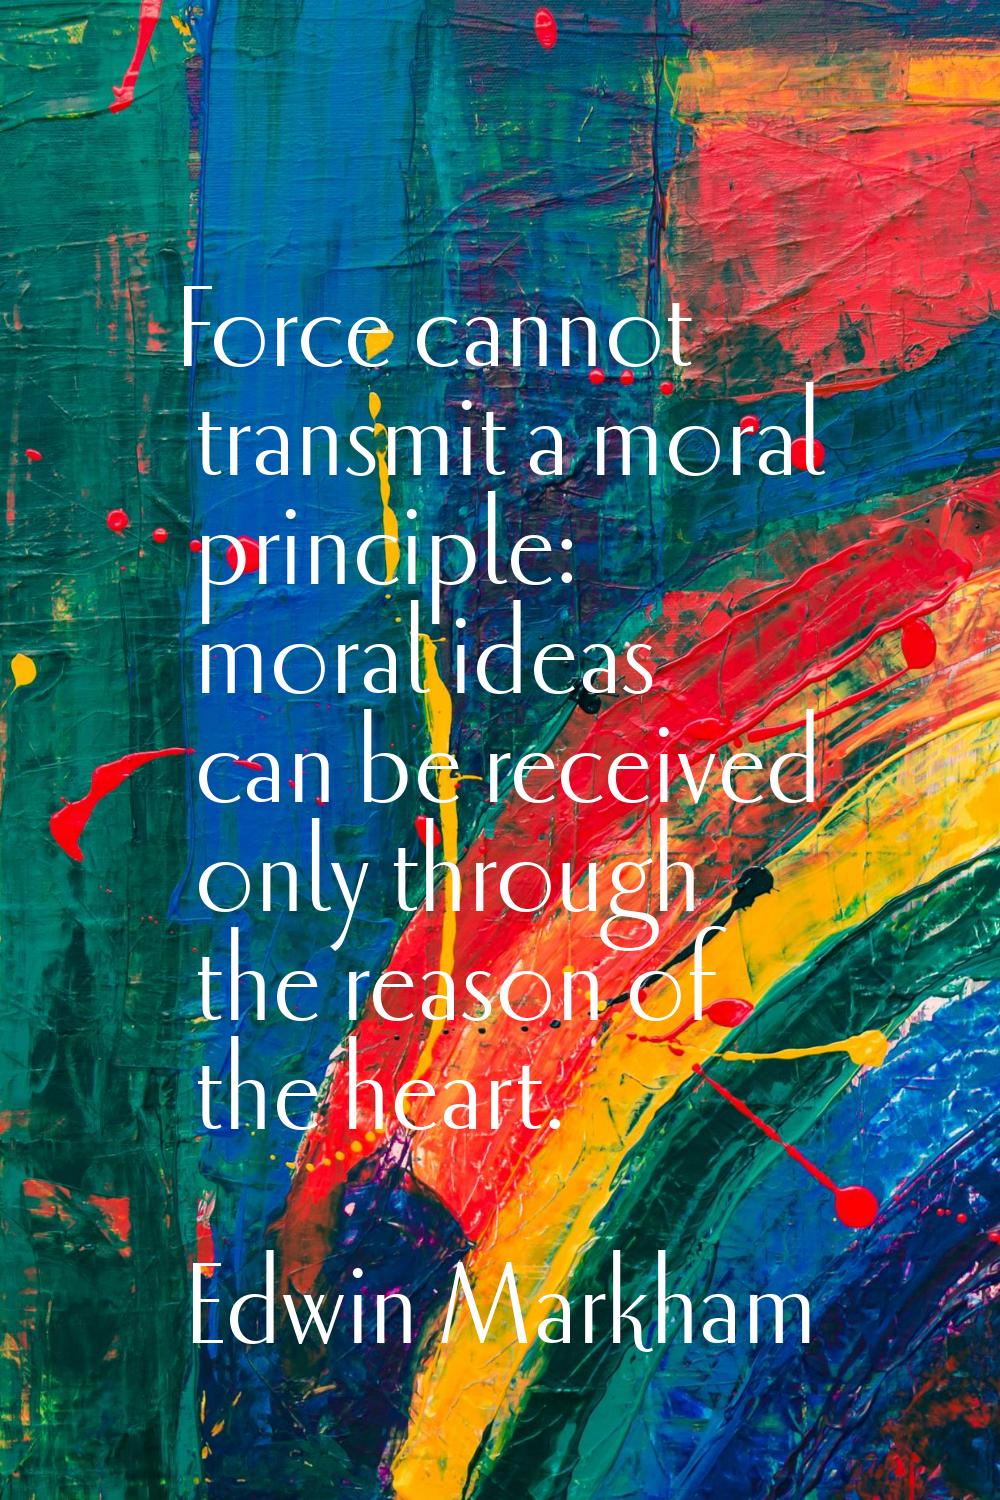 Force cannot transmit a moral principle: moral ideas can be received only through the reason of the